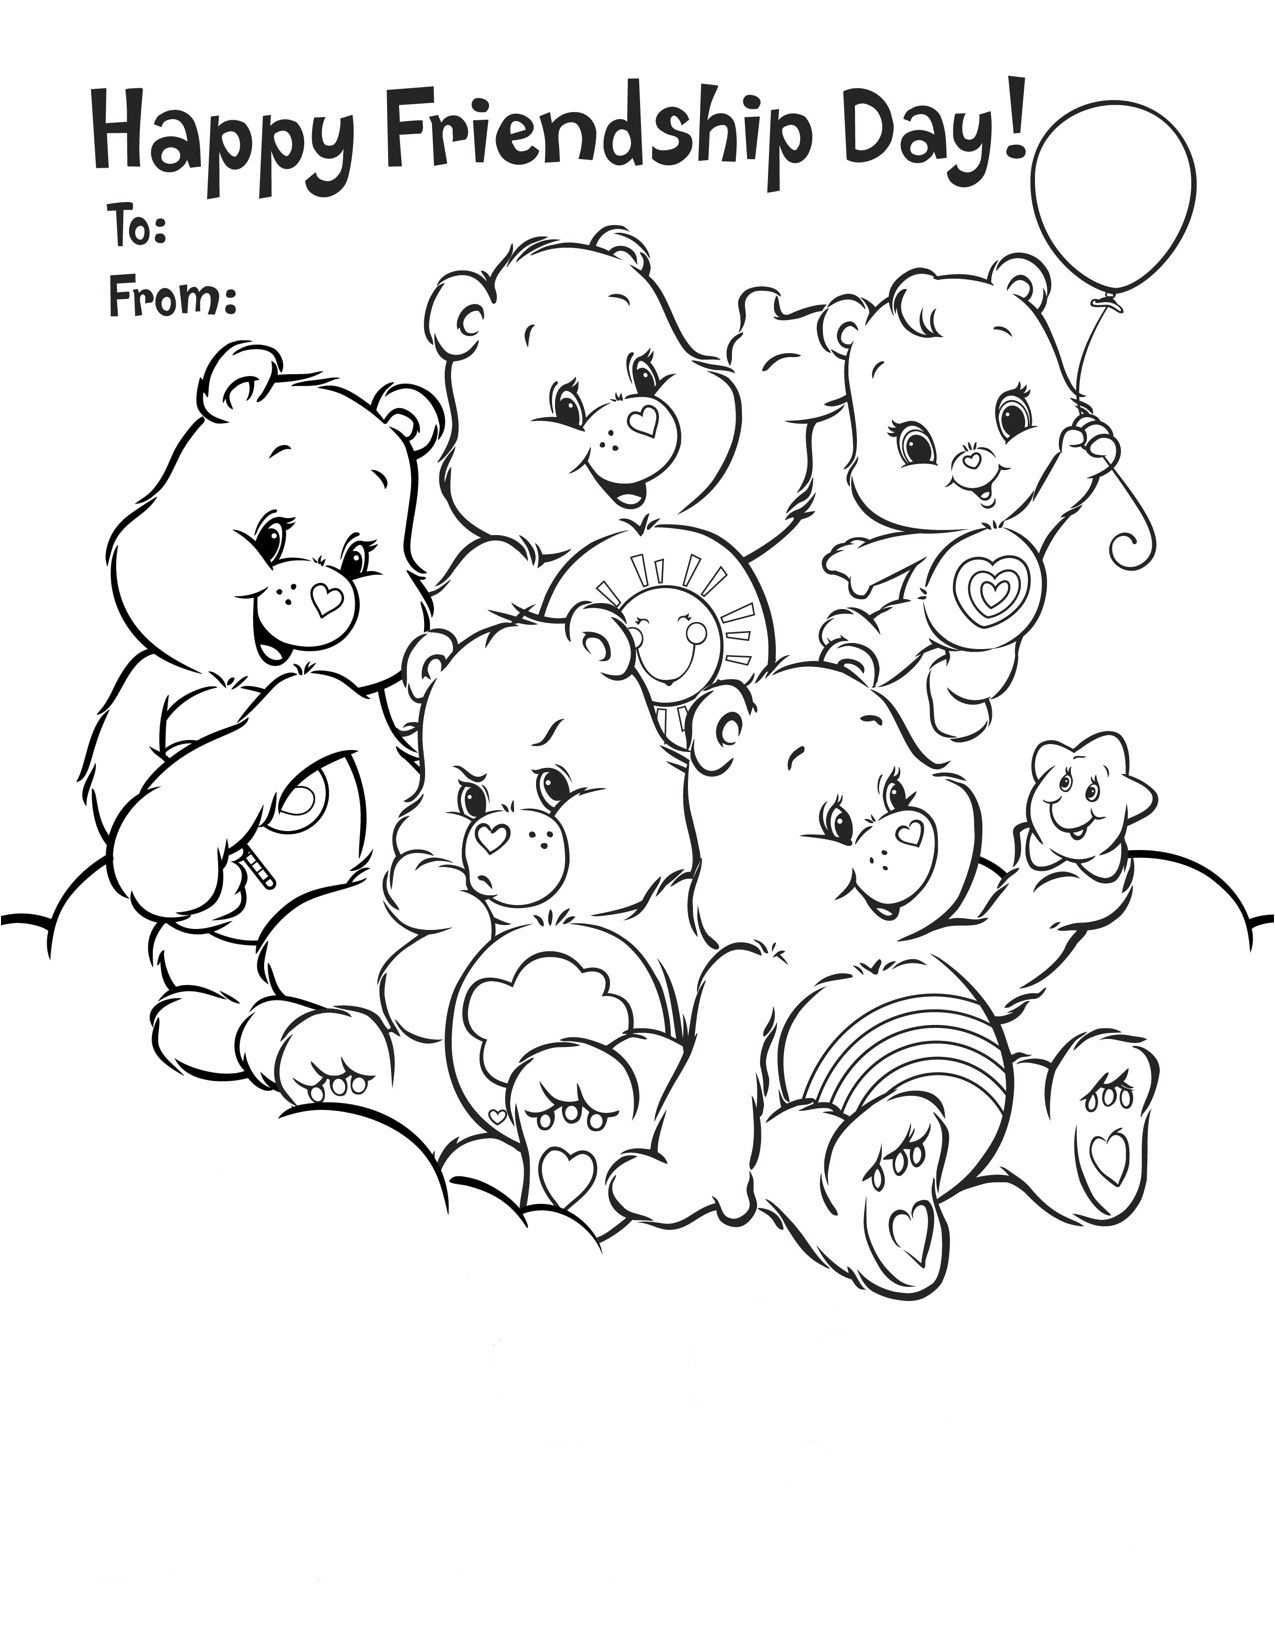 Friendship+Coloring+Pages+Printable | Coloring Pages | Pinterest - Free Printable Bff Coloring Pages